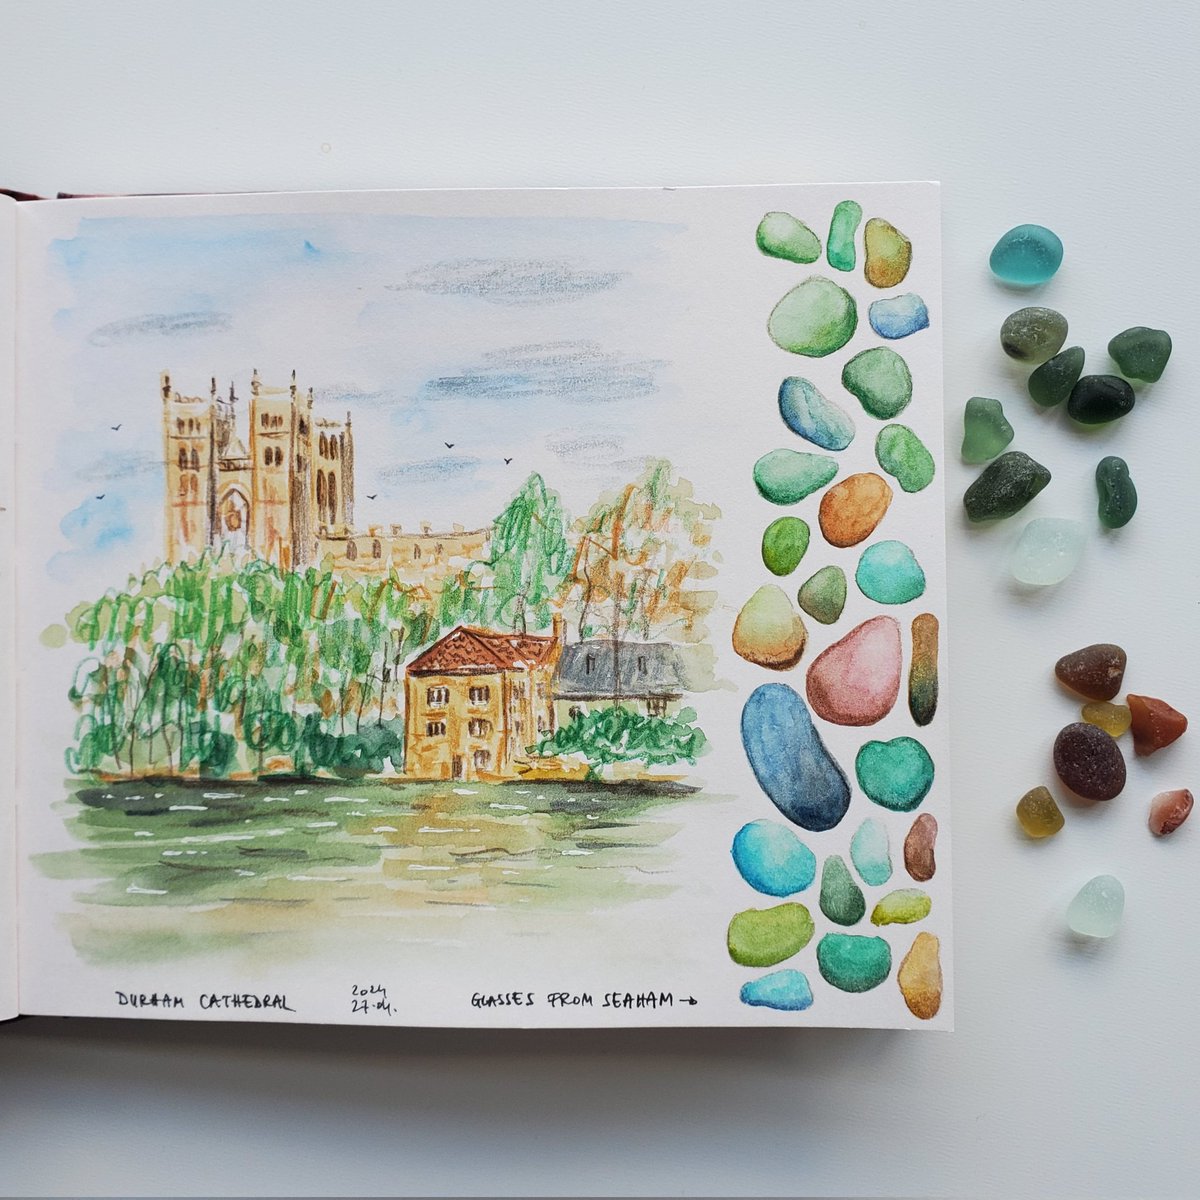 Sketching while exploring the stunning county Durham. 

#durhamcathedral #durham #seaglass #seaham #collectingmemories #tundeart #mixedmedia #discovering